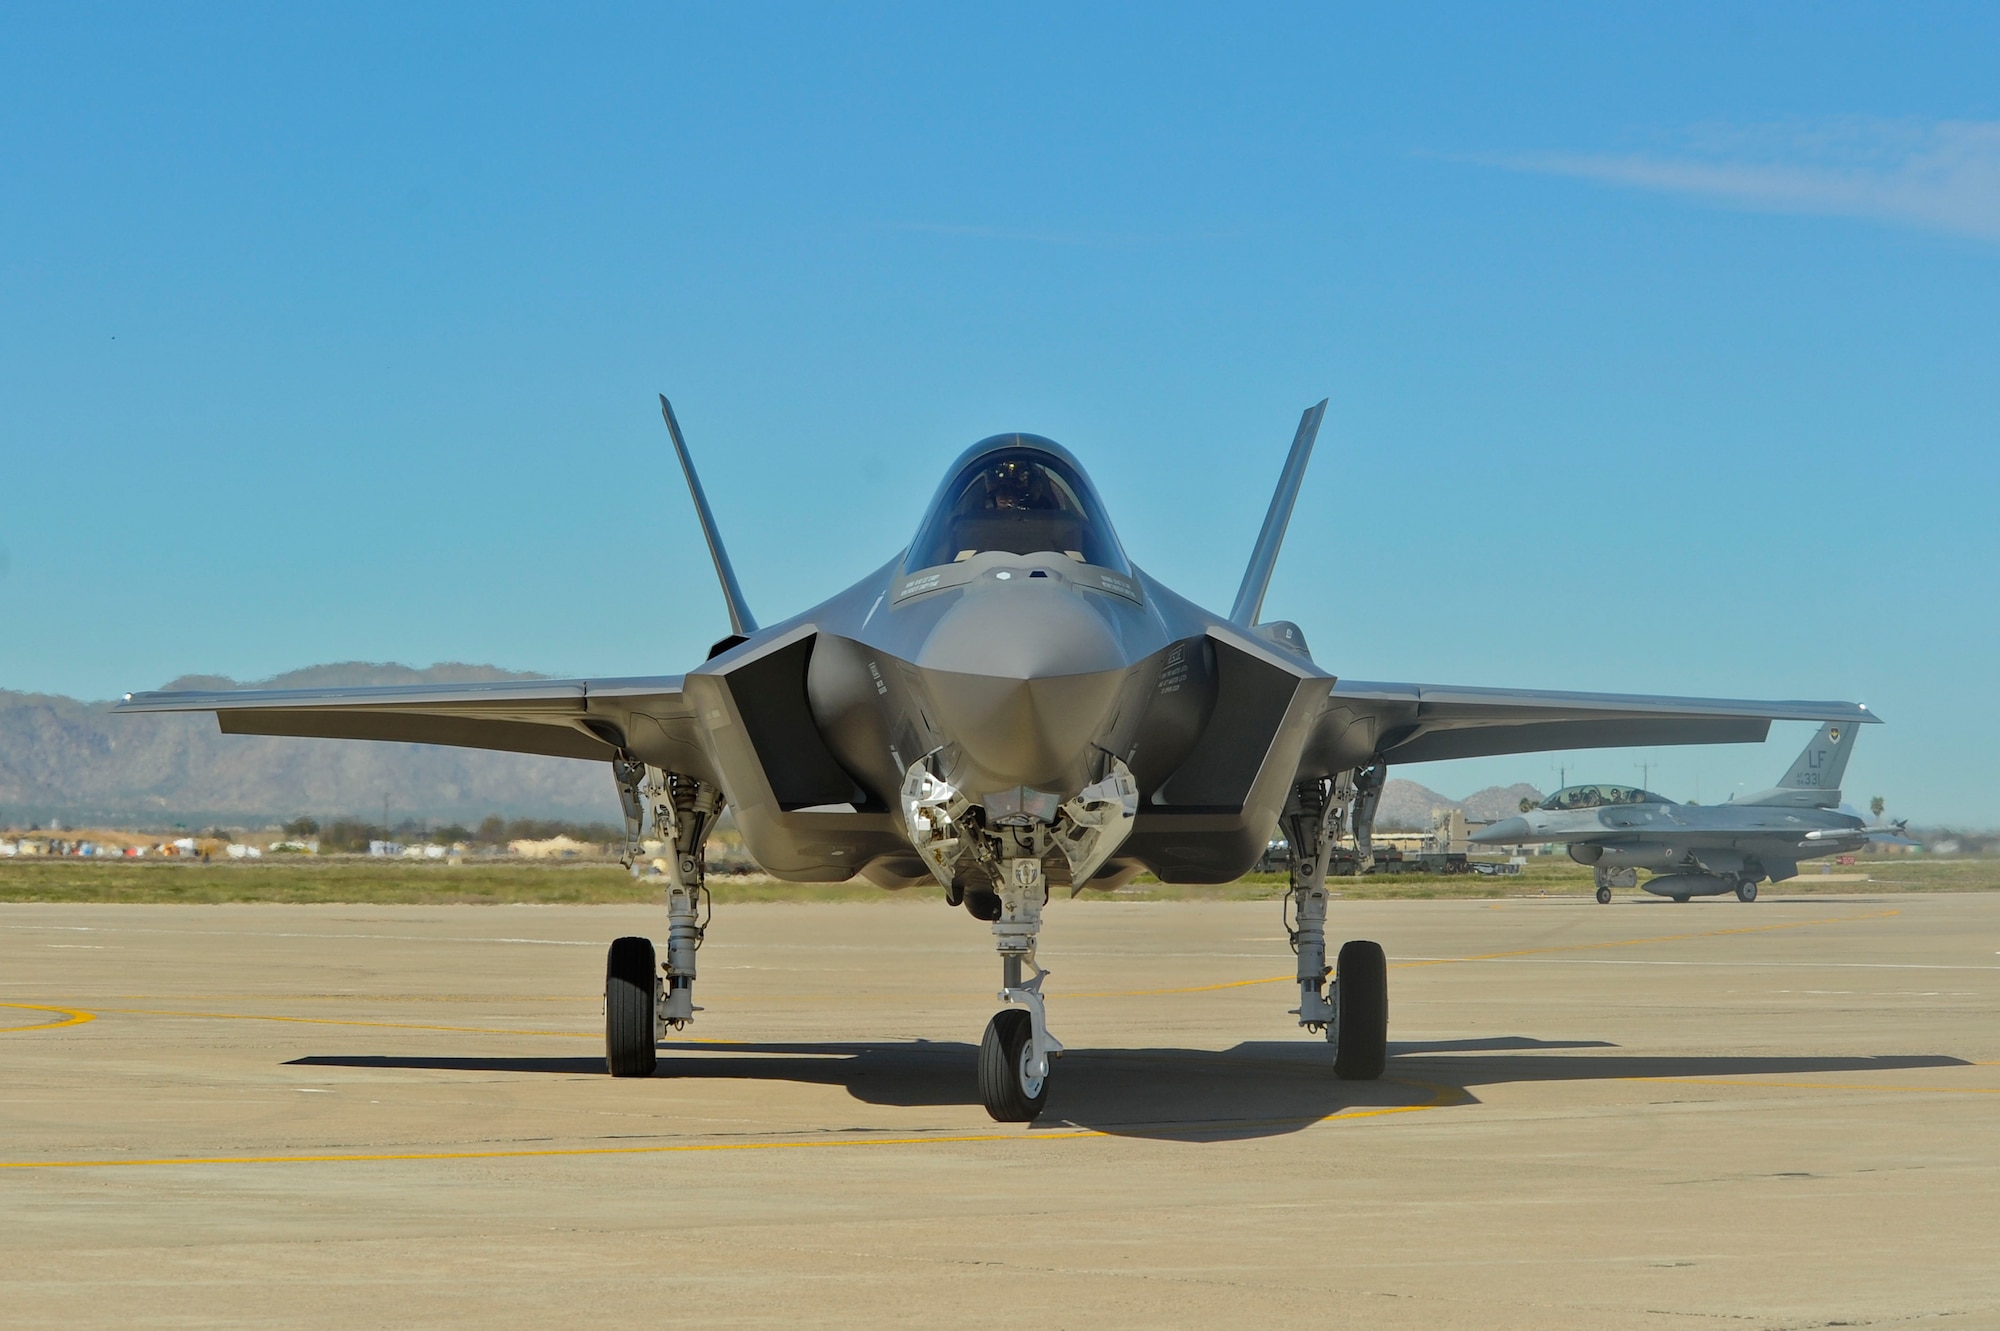 F-35 Lightning II takes over Europe - American fifth-generation fighter almost wins over Rafale, Gripen, and Eurofighter